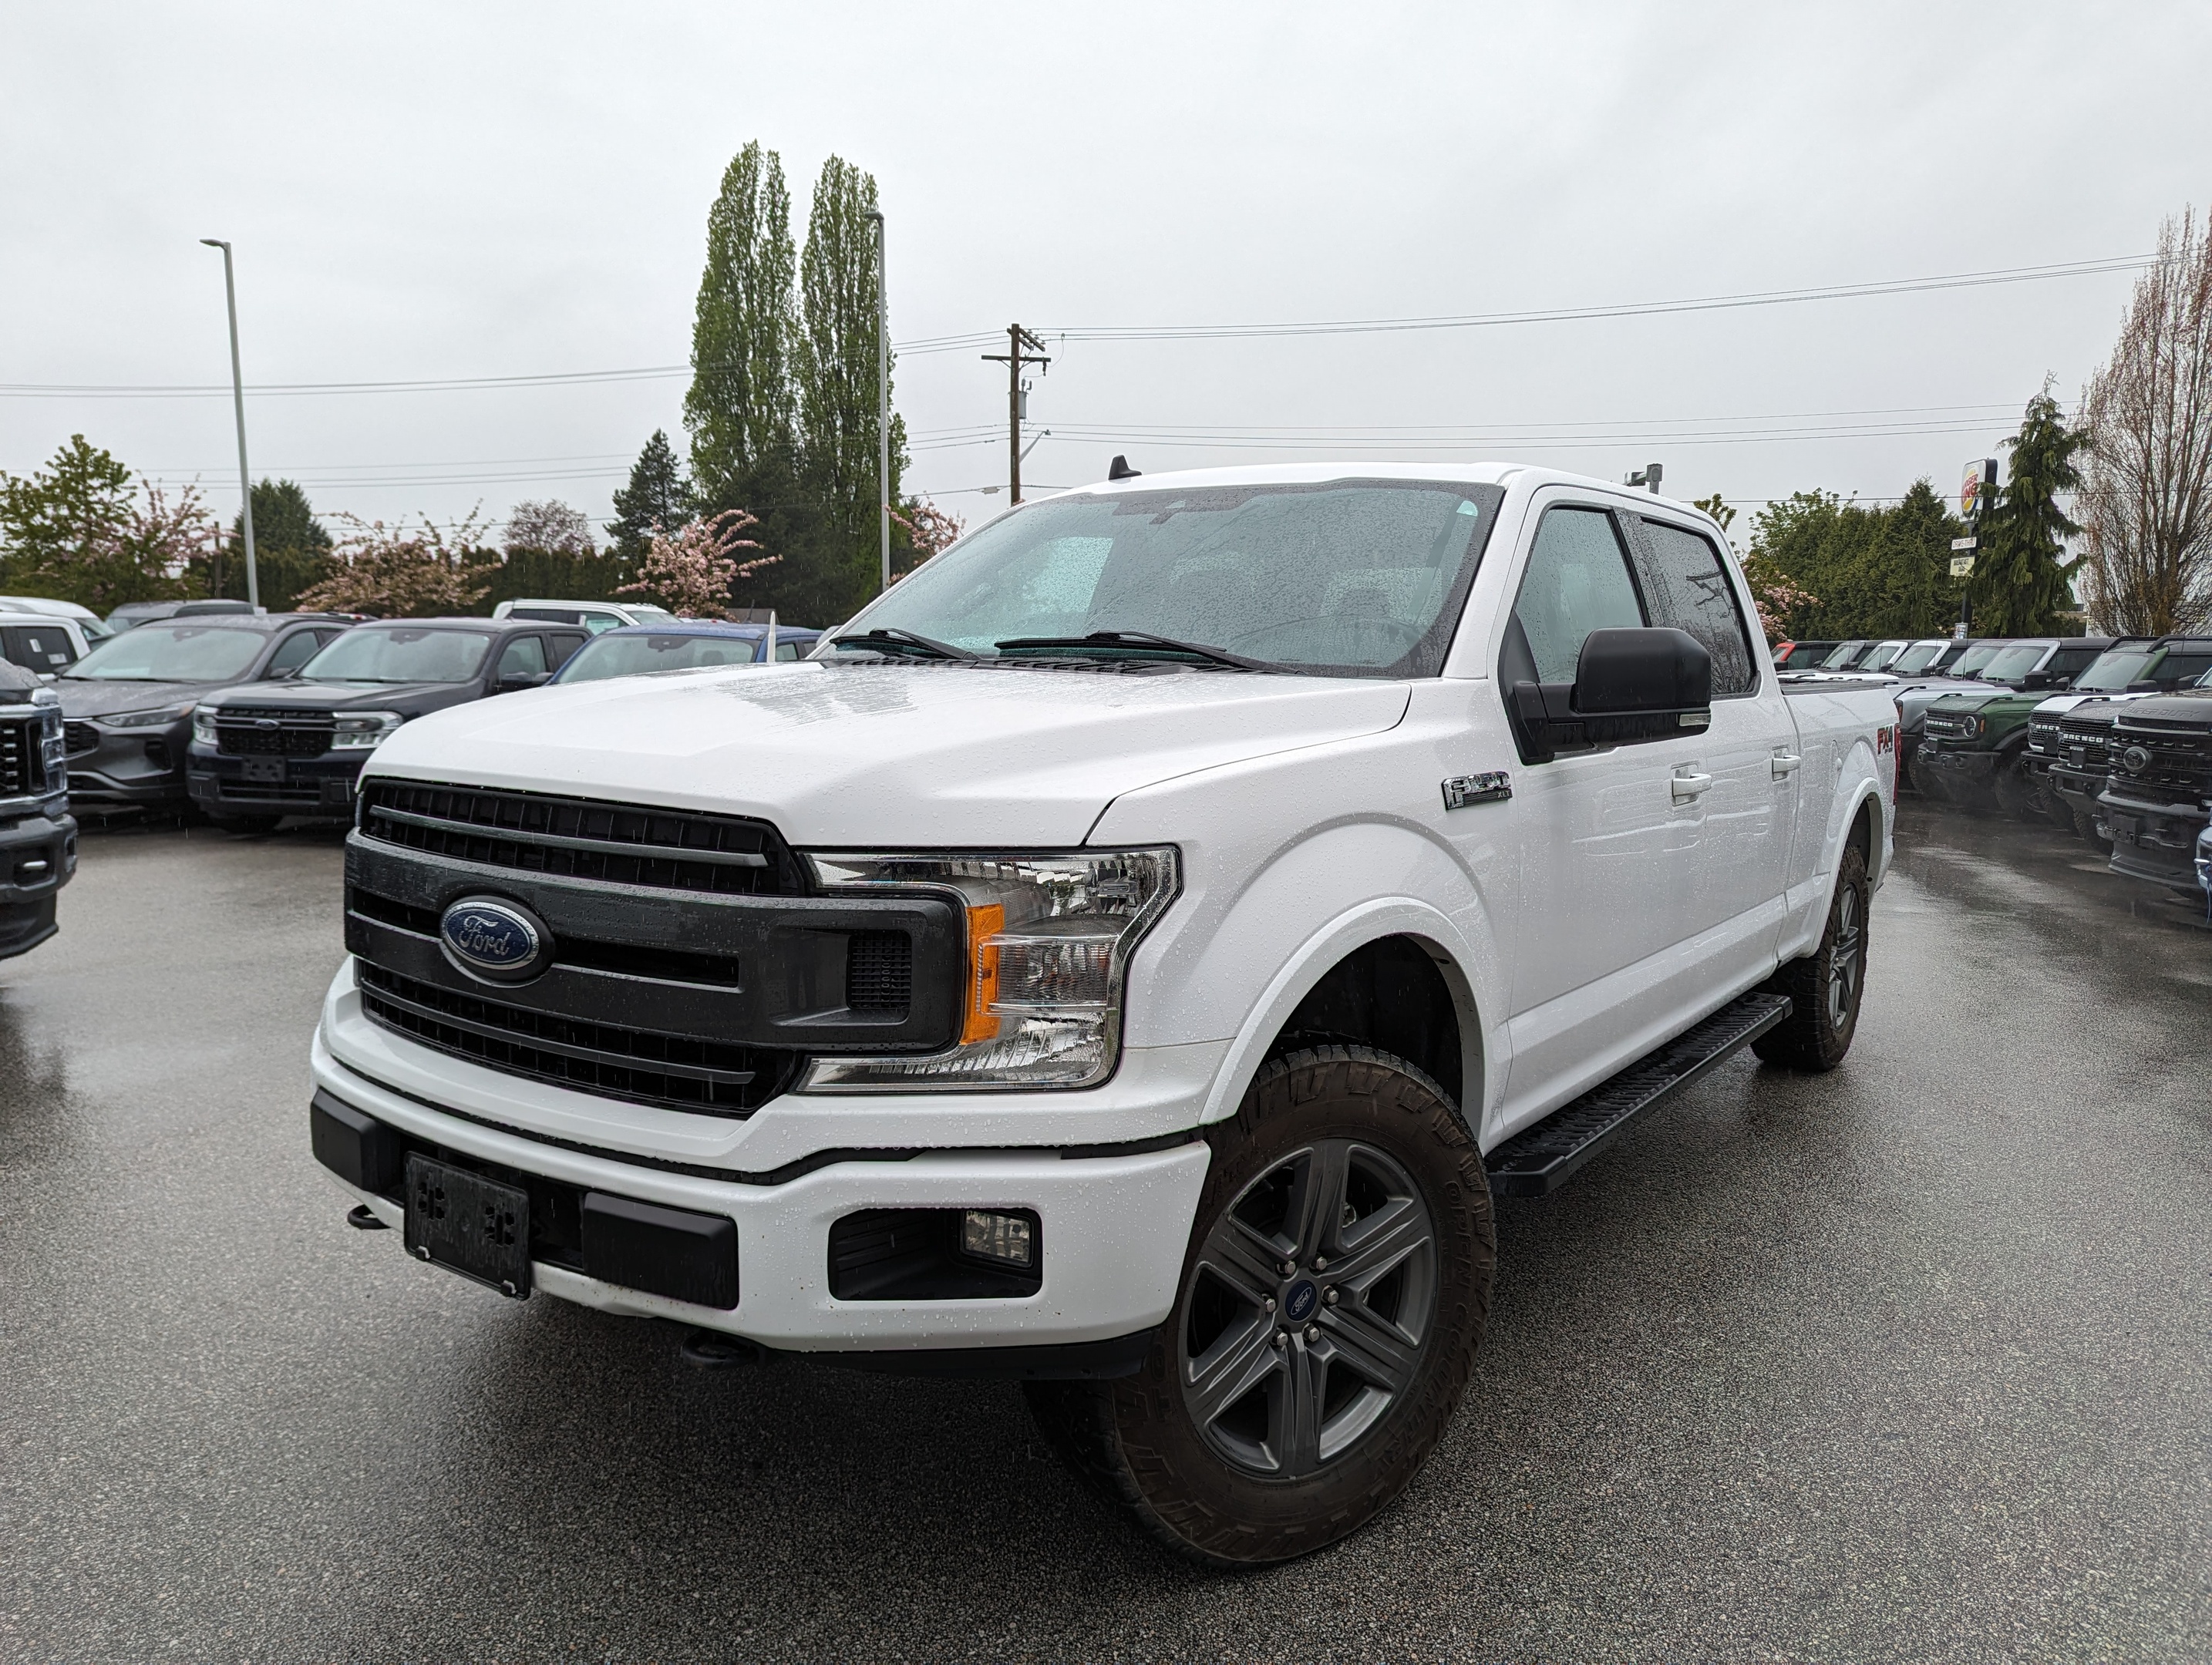 2020 Ford F-150 Sport - FX4 Off-Road Pkg, Twin Panel Moonroof